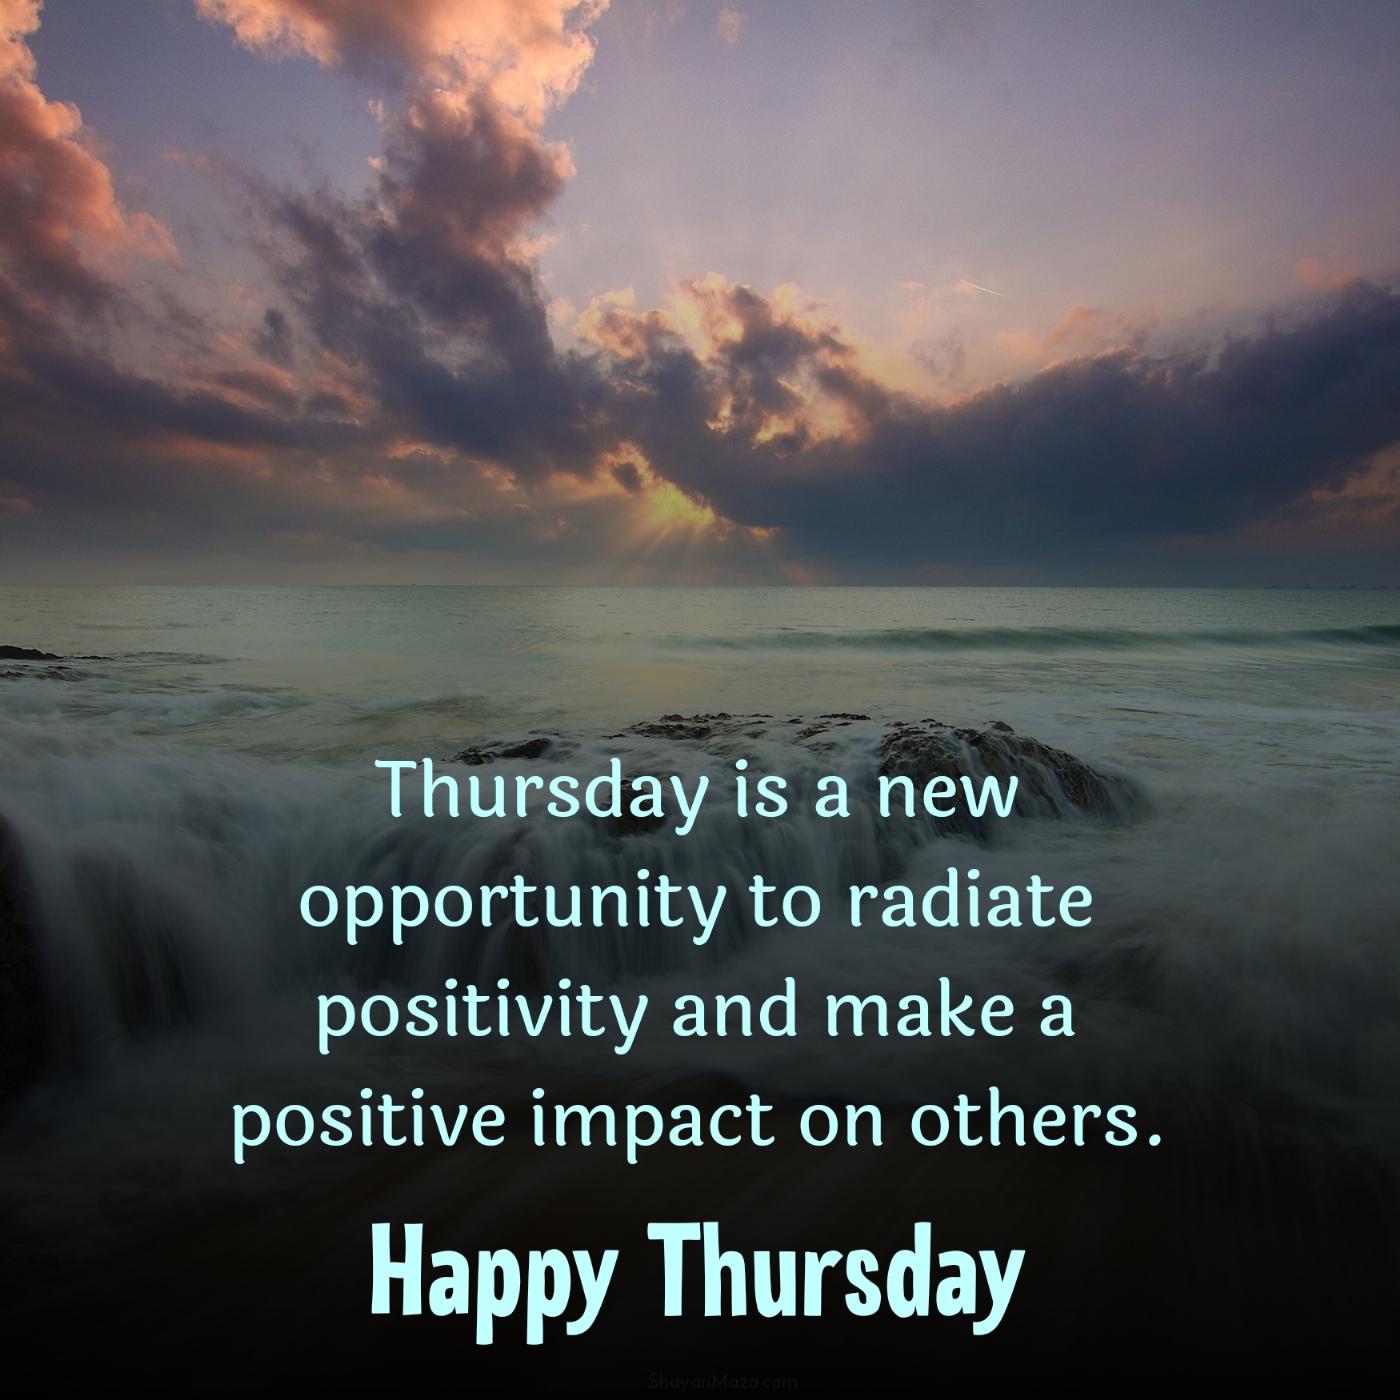 Thursday is a new opportunity to radiate positivity